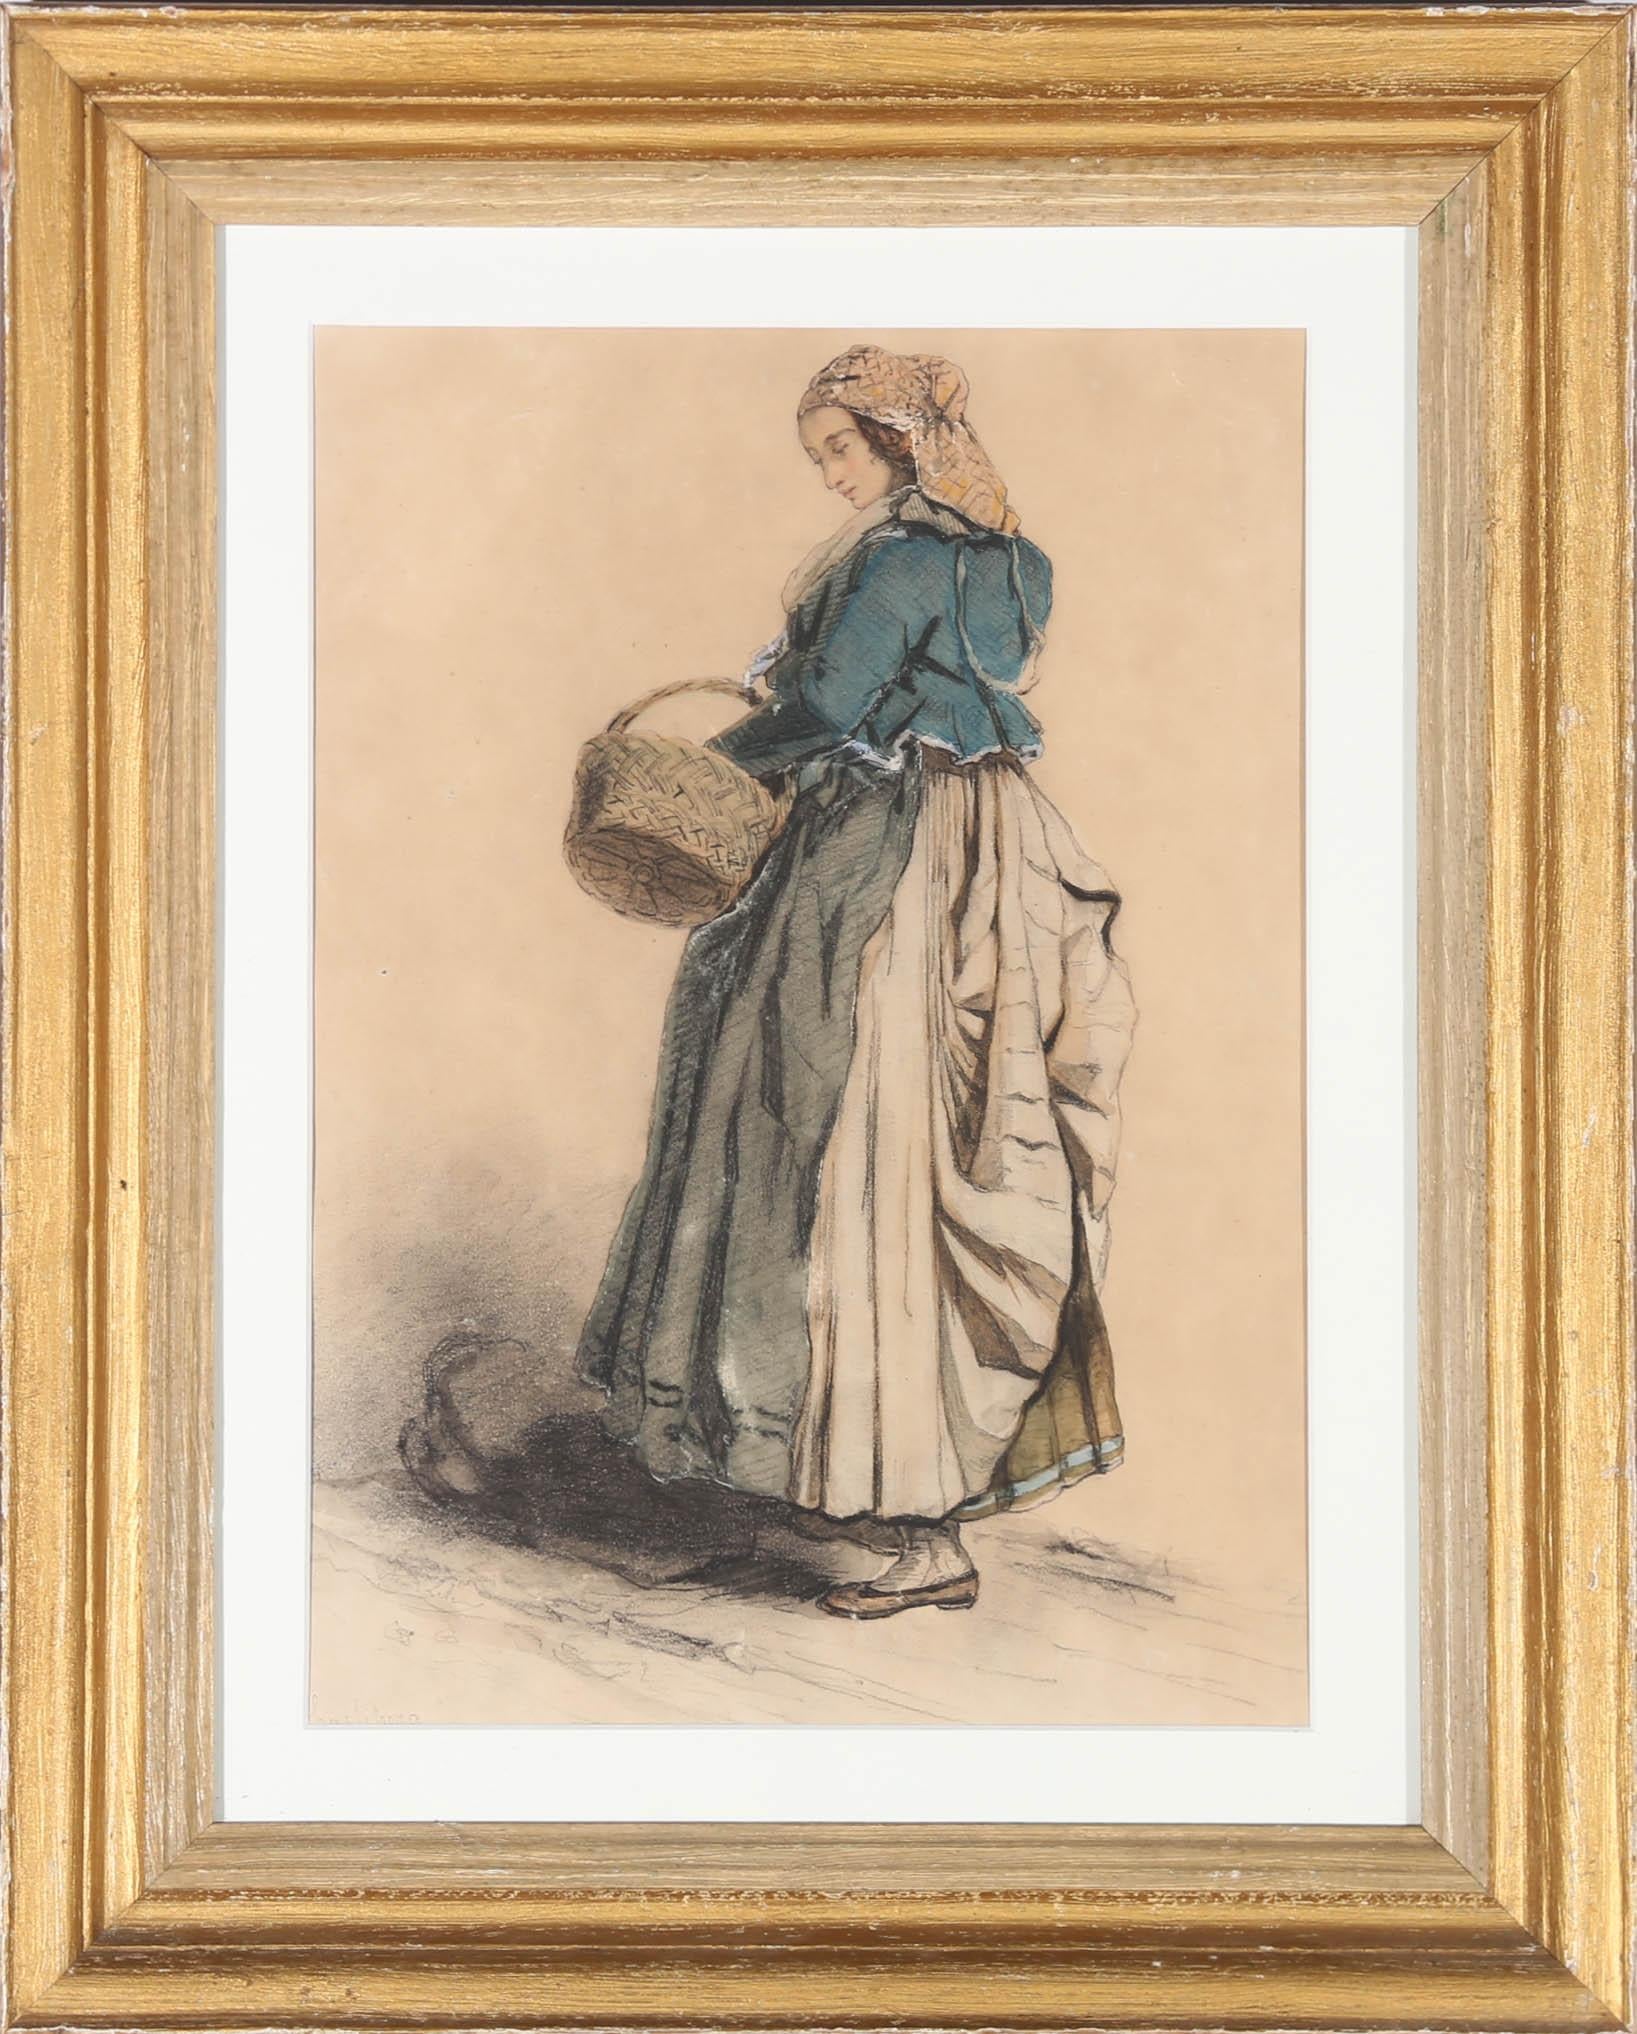 A fine 19thC charcoal and watercolour study of a young woman from the town of Halisberg in Switzerland. The artist has signed faintly to the lower left and inscribed the location to the lower left corner. Presented in a 20th Century gilt frame with